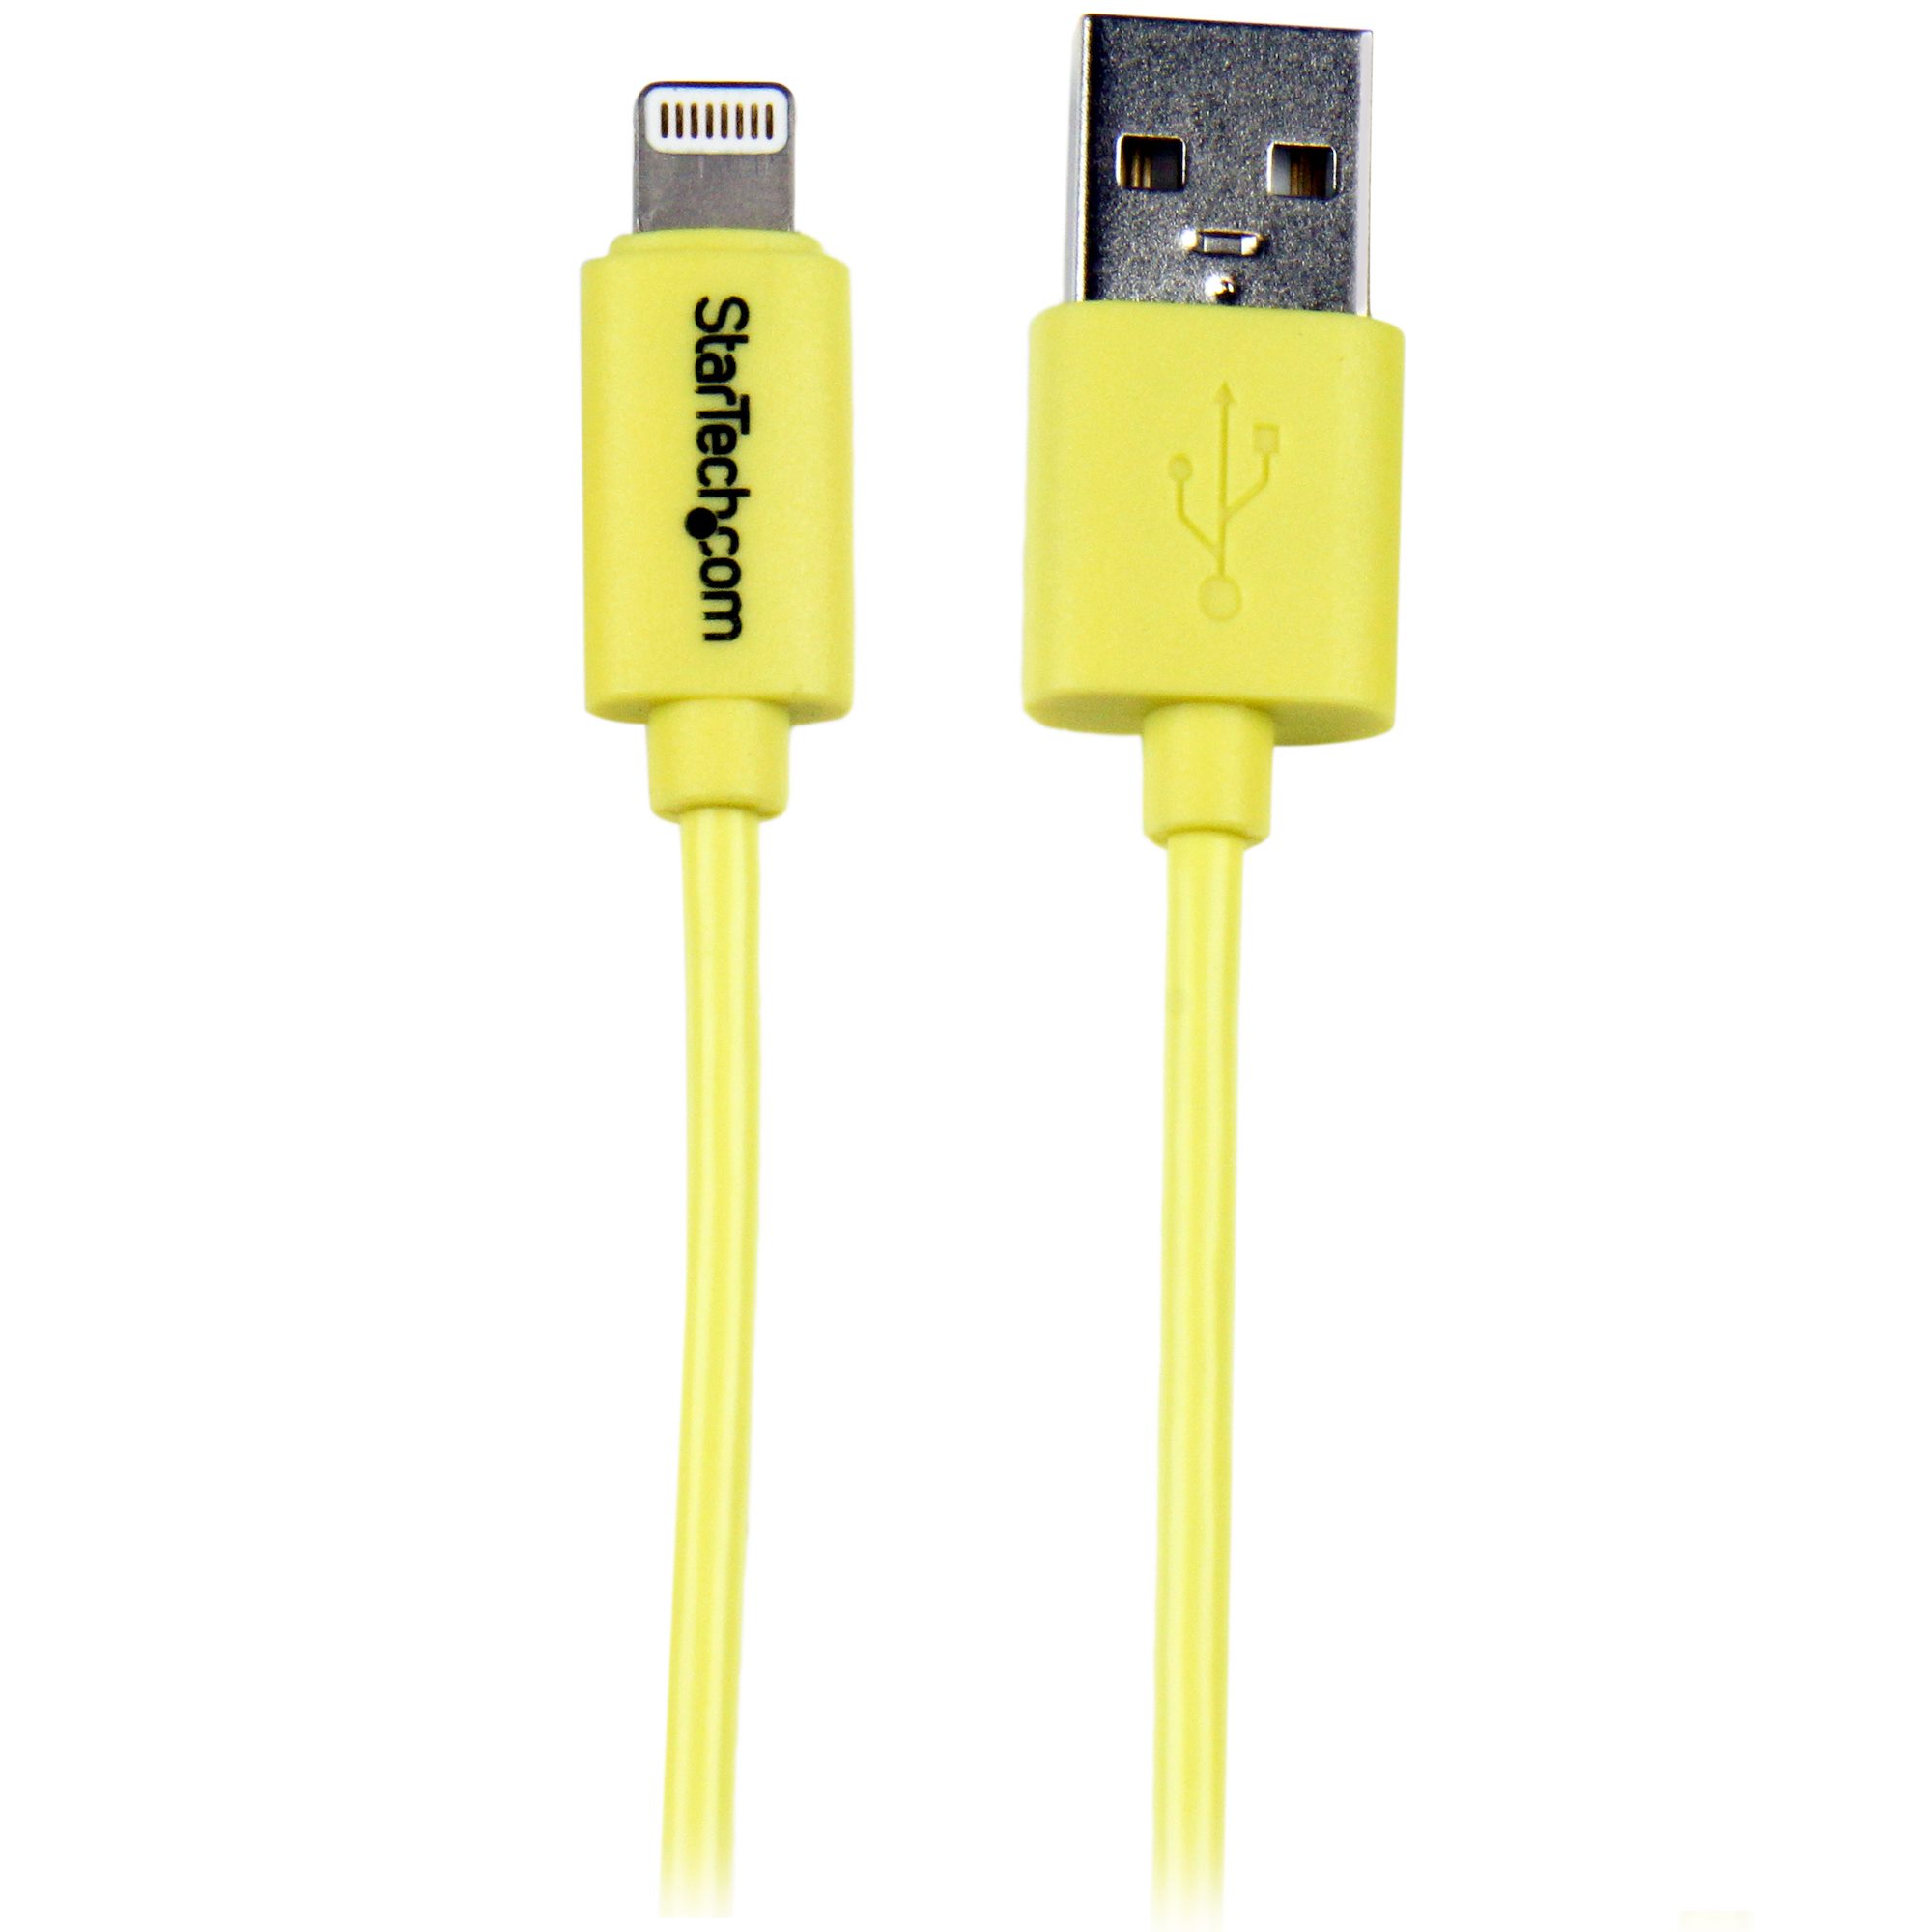 3 6FT USB DATA POWER CHARGER CABLE DOCK CONNECTOR APPLE IPAD IPHONE IPOD YELLOW 